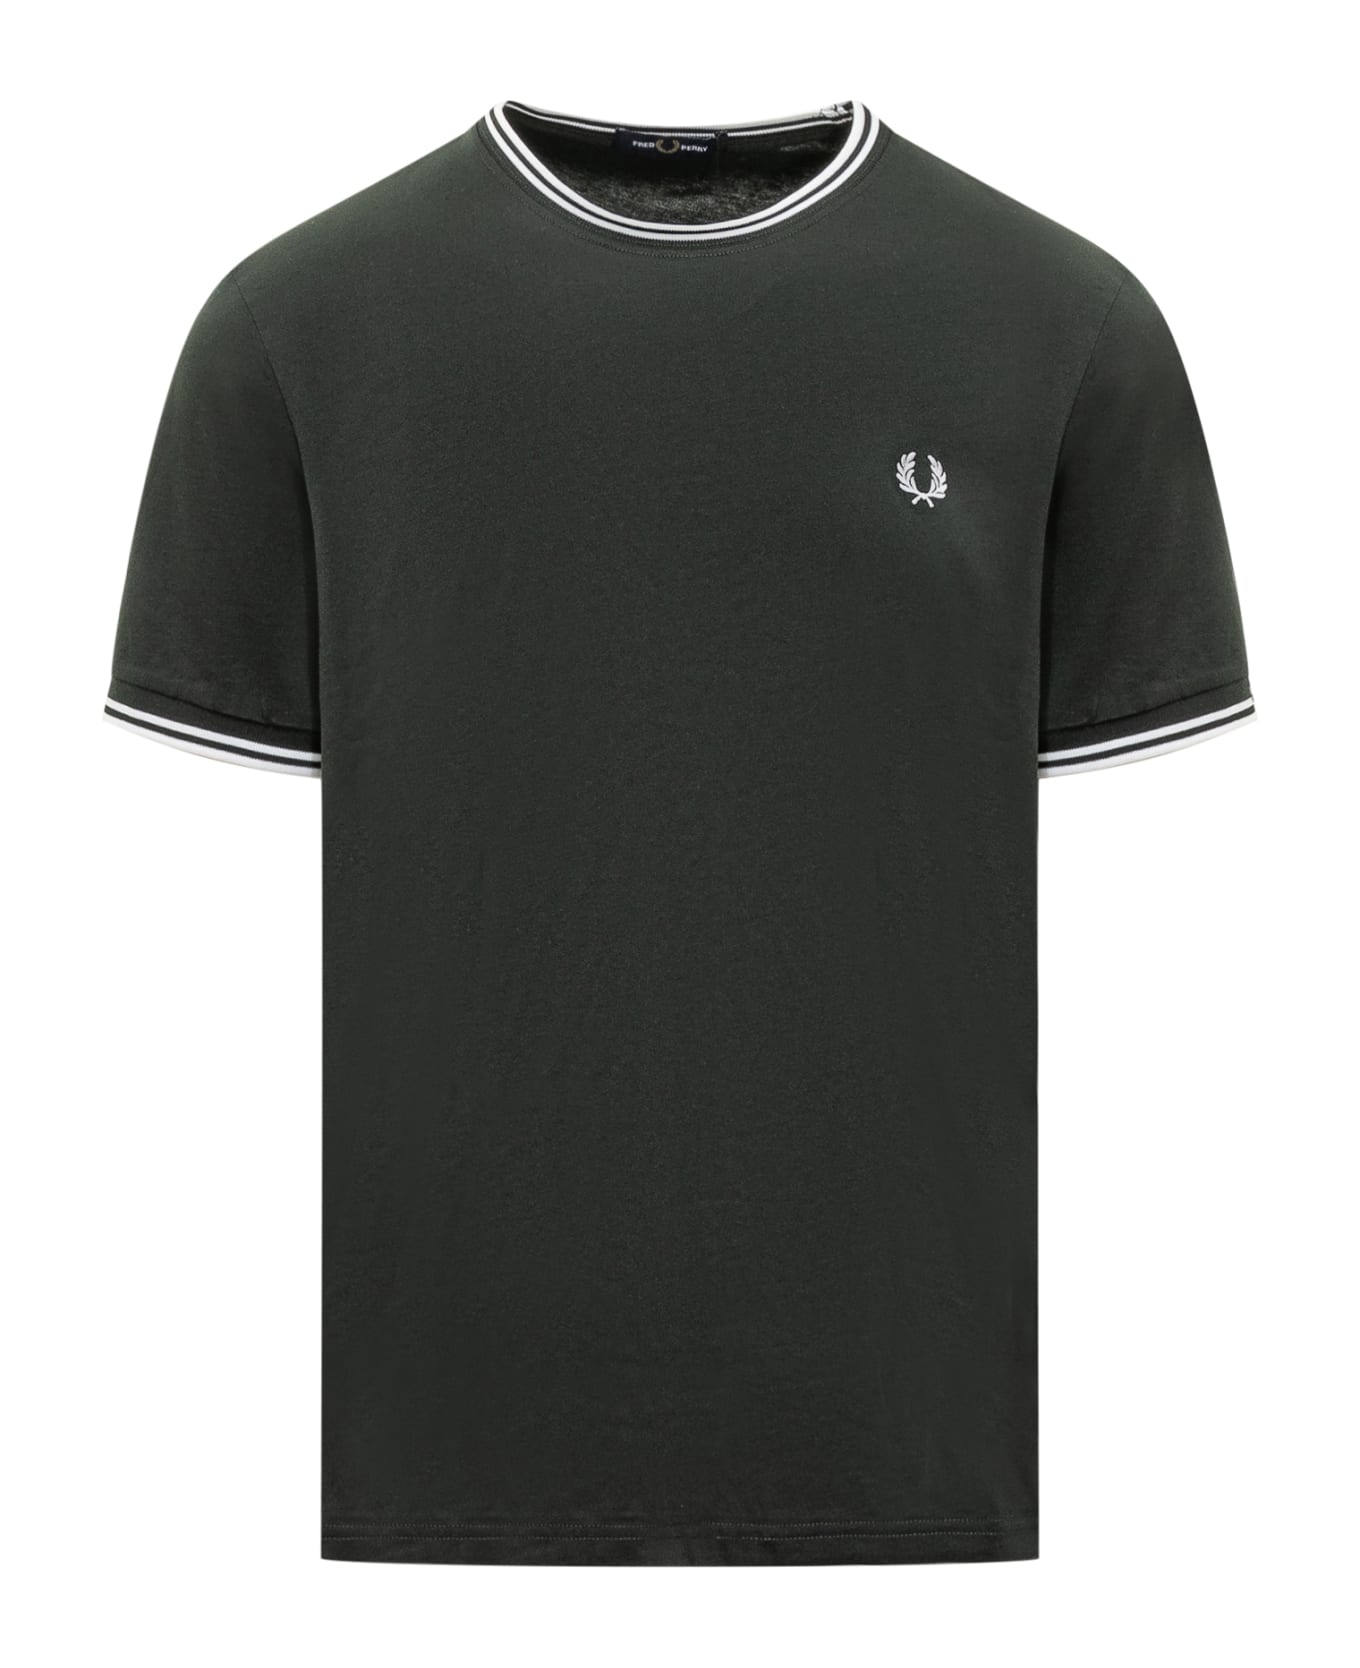 Fred Perry T-shirt - NIGHT GREEN/SNWHT